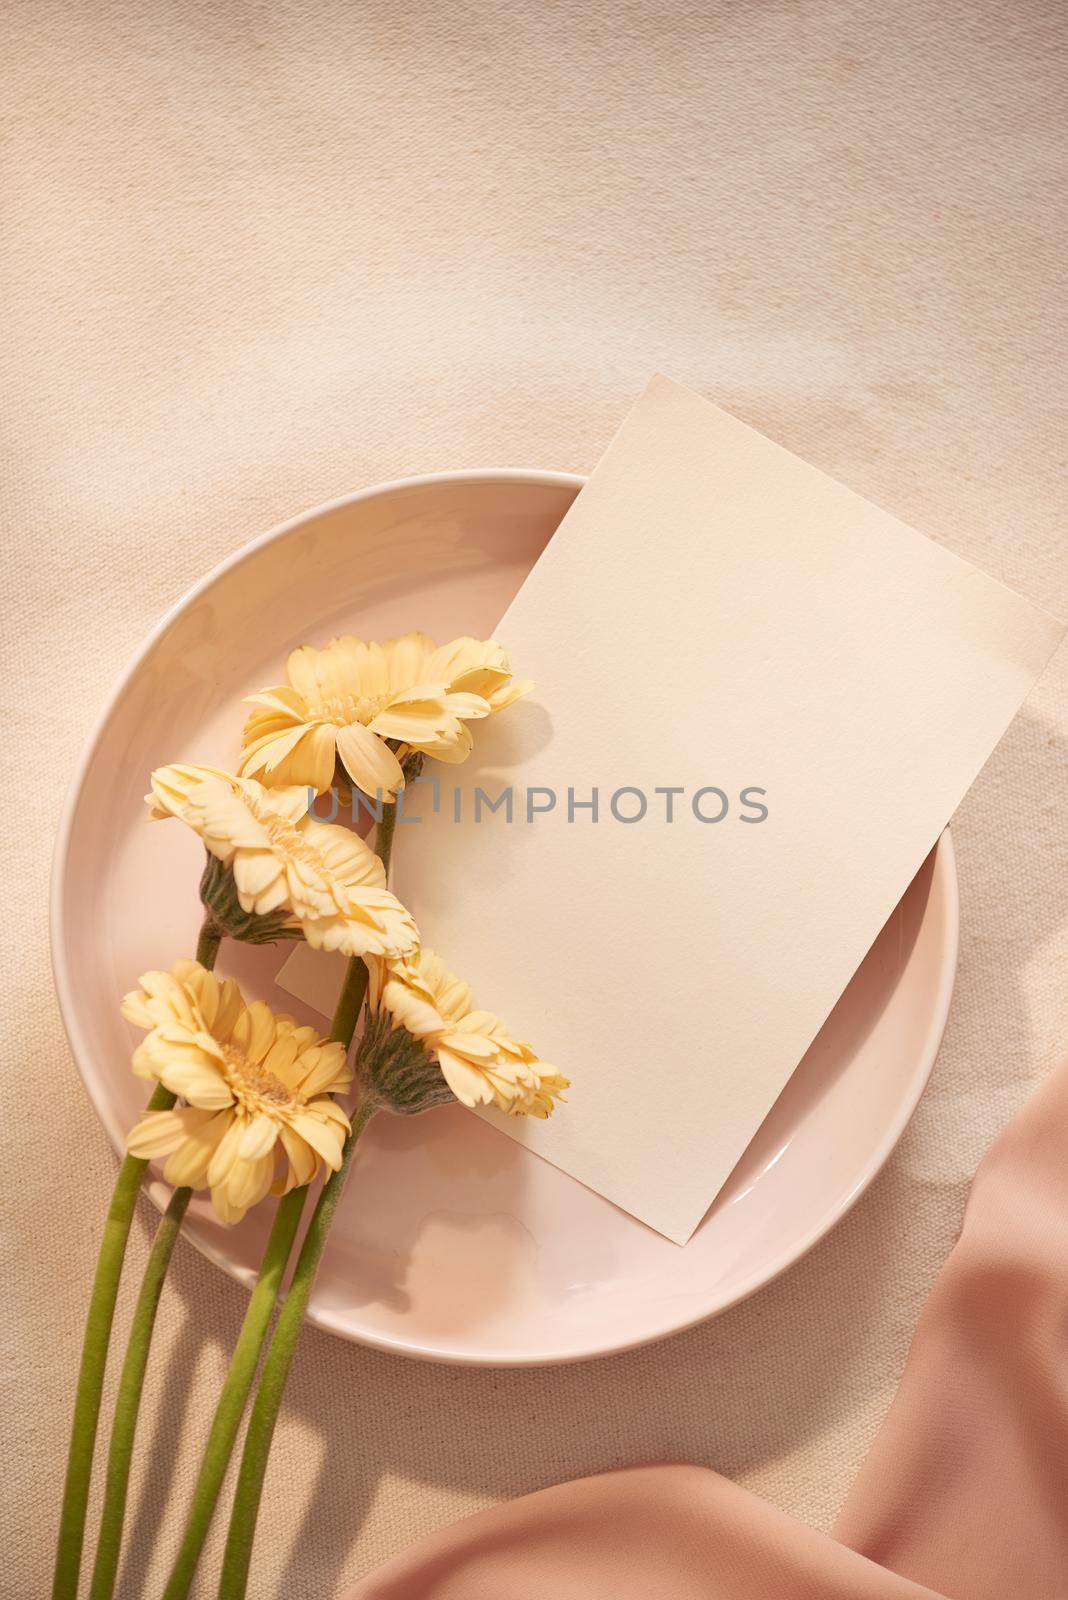 Flowers on plate with card and fabric on the light background by makidotvn